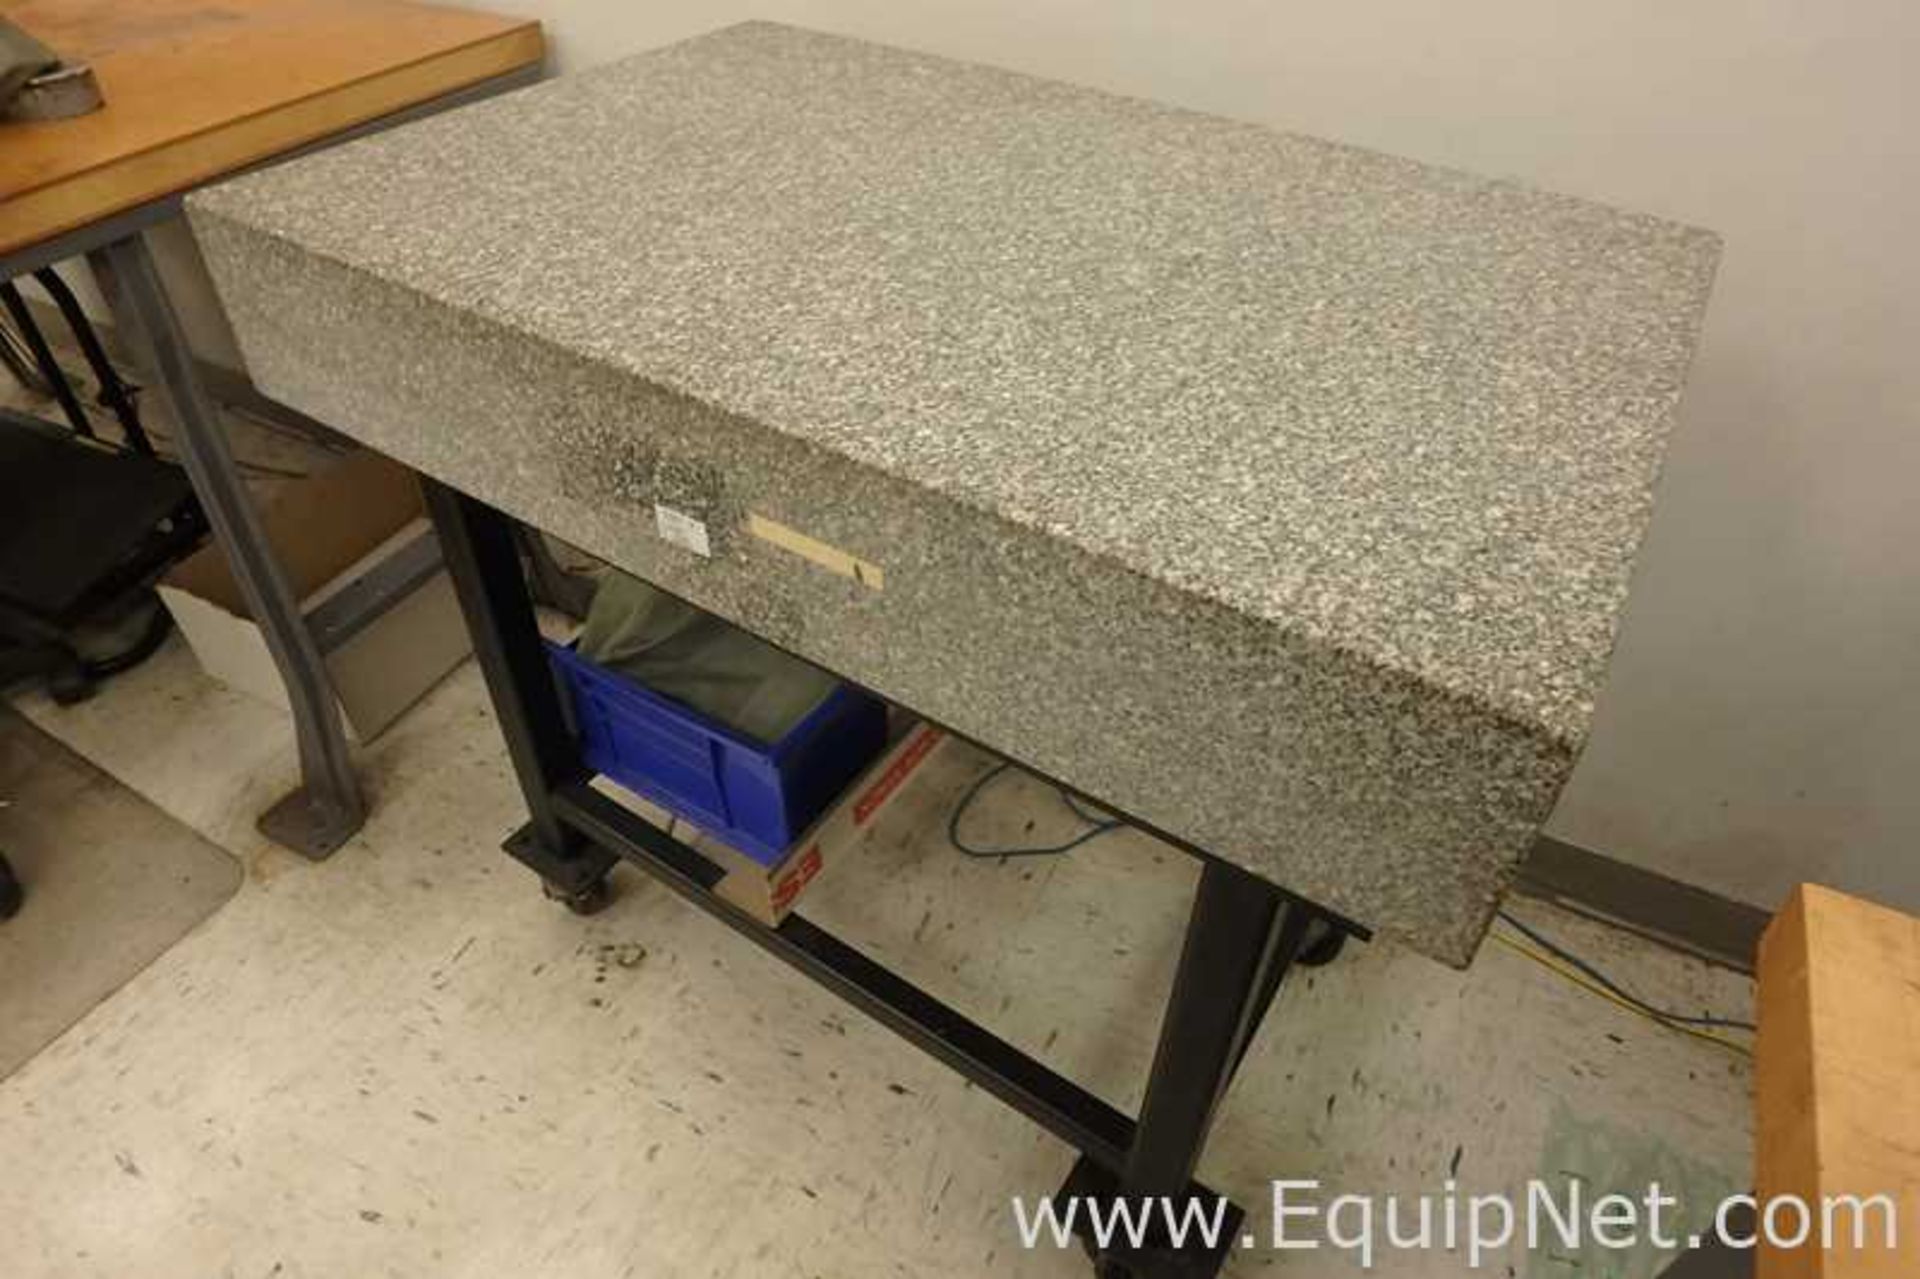 Rock of Ages Granite Surface Plate - Image 2 of 3